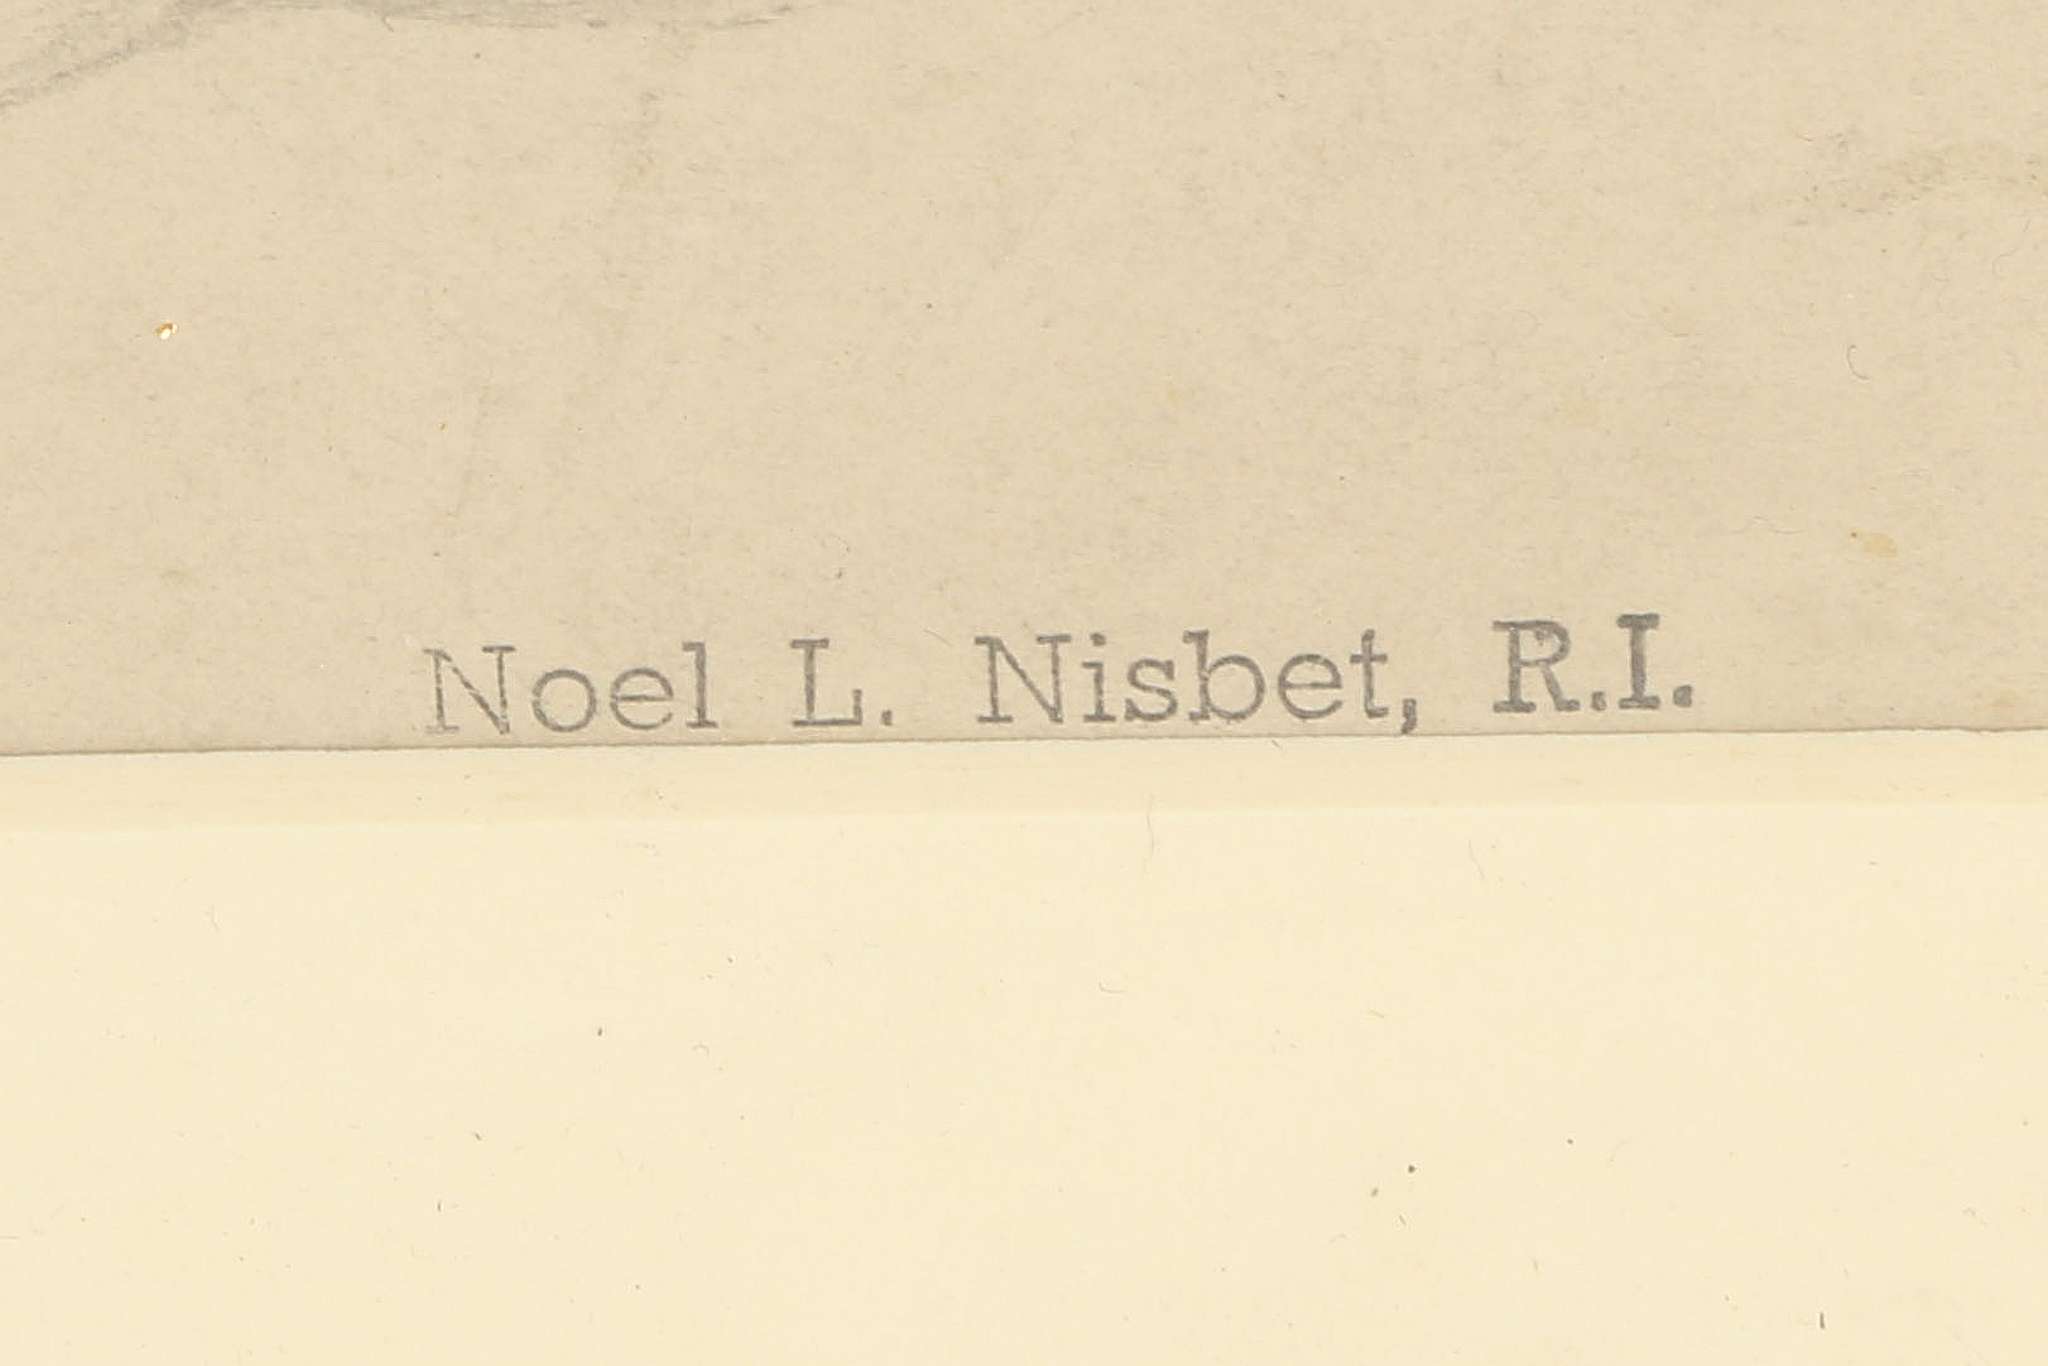 Noel Laura Nisbet R.I. 1881-1956, 'The Blessing', pencil with studio secession stamp lower right, - Image 3 of 8